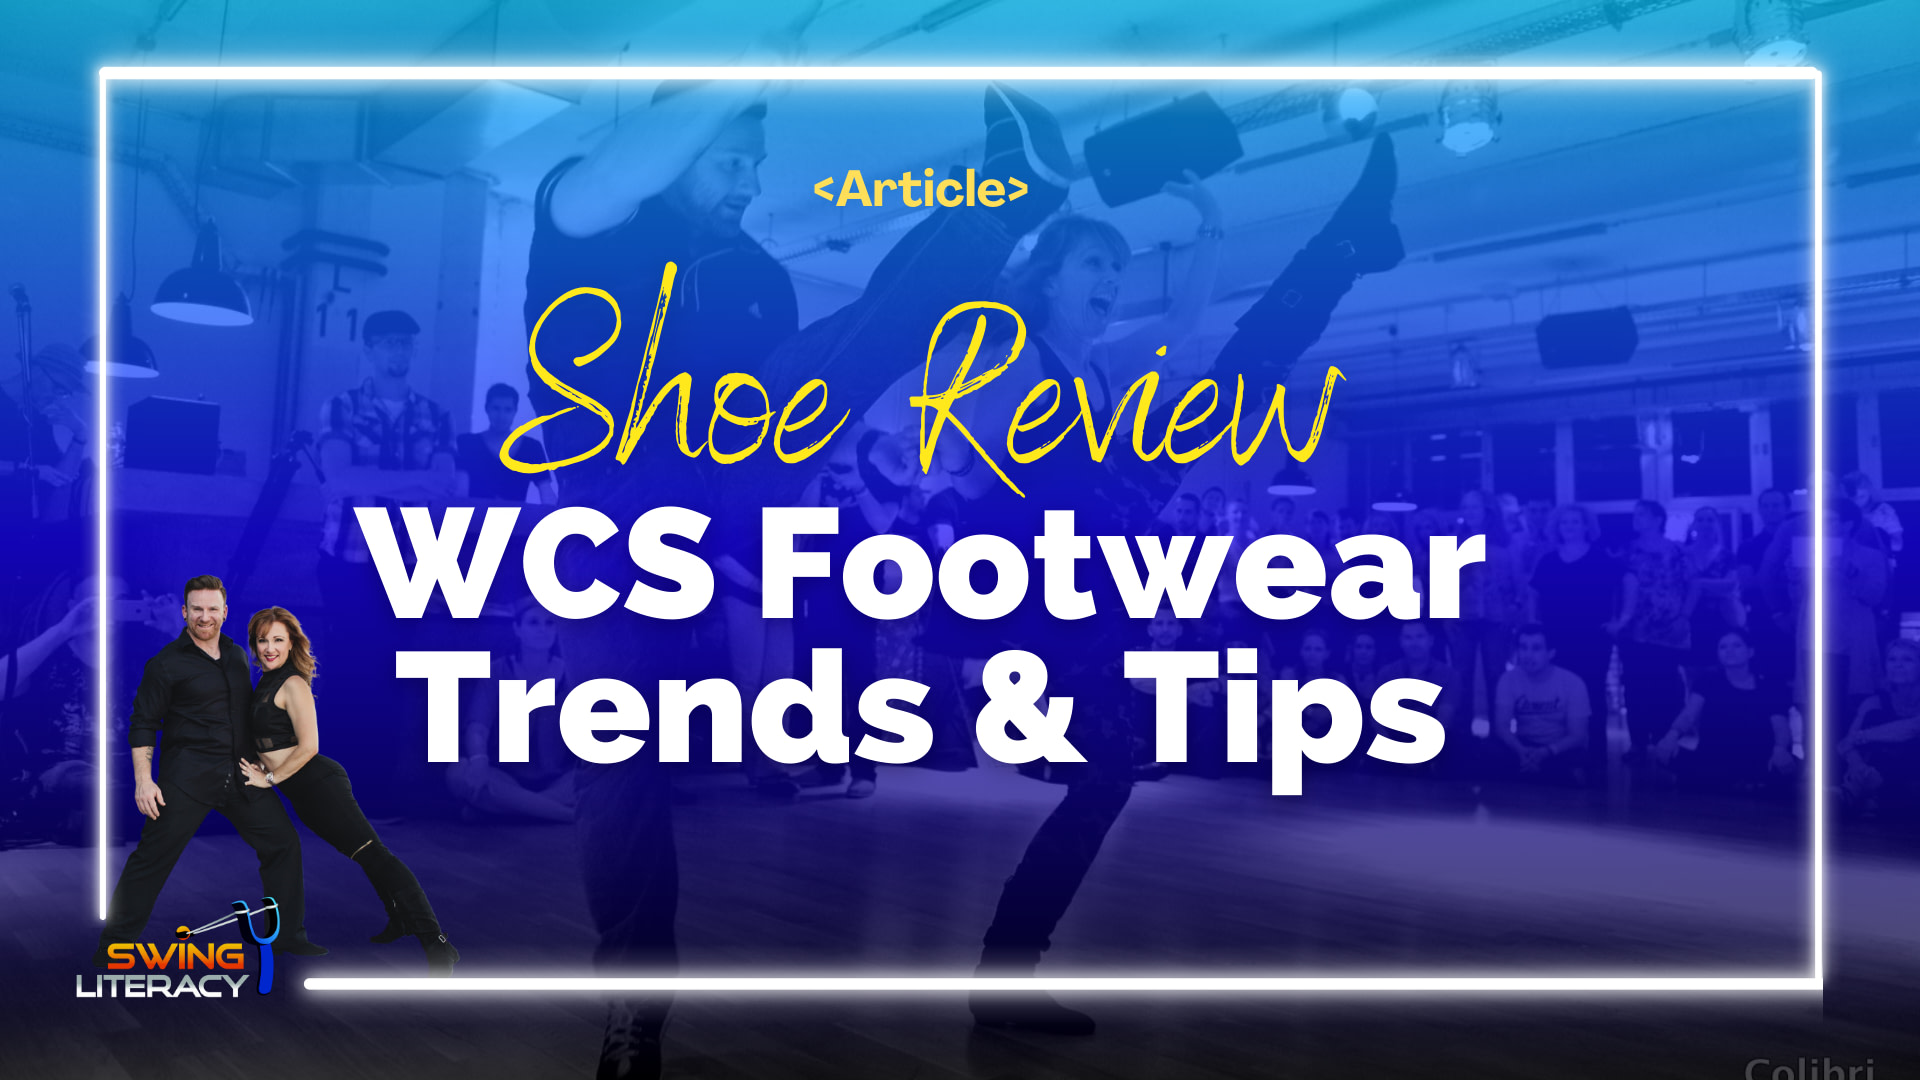 Shoe Review: WCS Footwear Trends & Tips